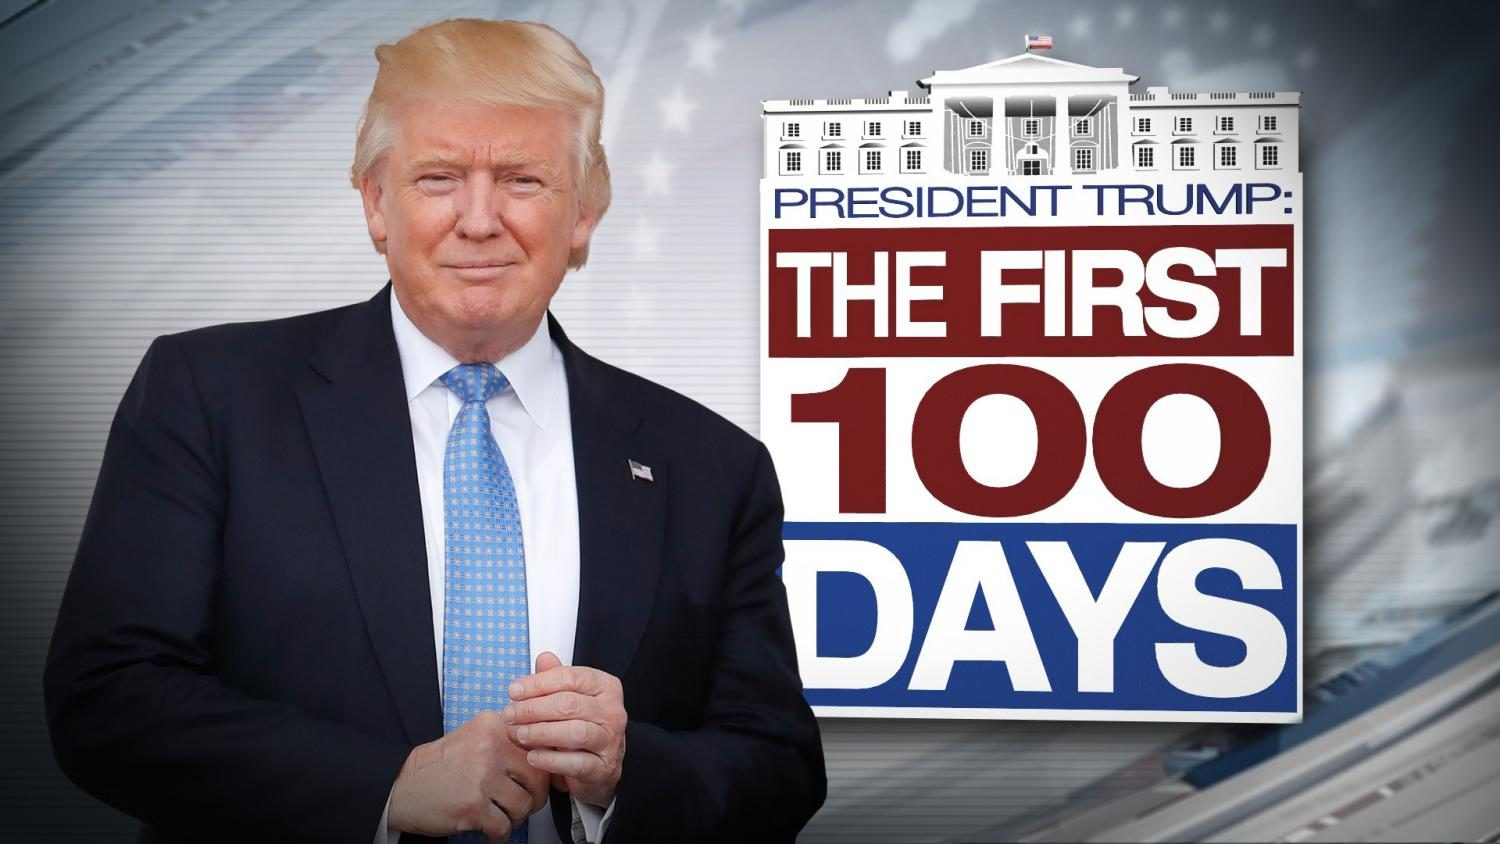 http://www.kctv5.com/story/34309823/trumps-first-100-days-a-breakdown-of-his-plan